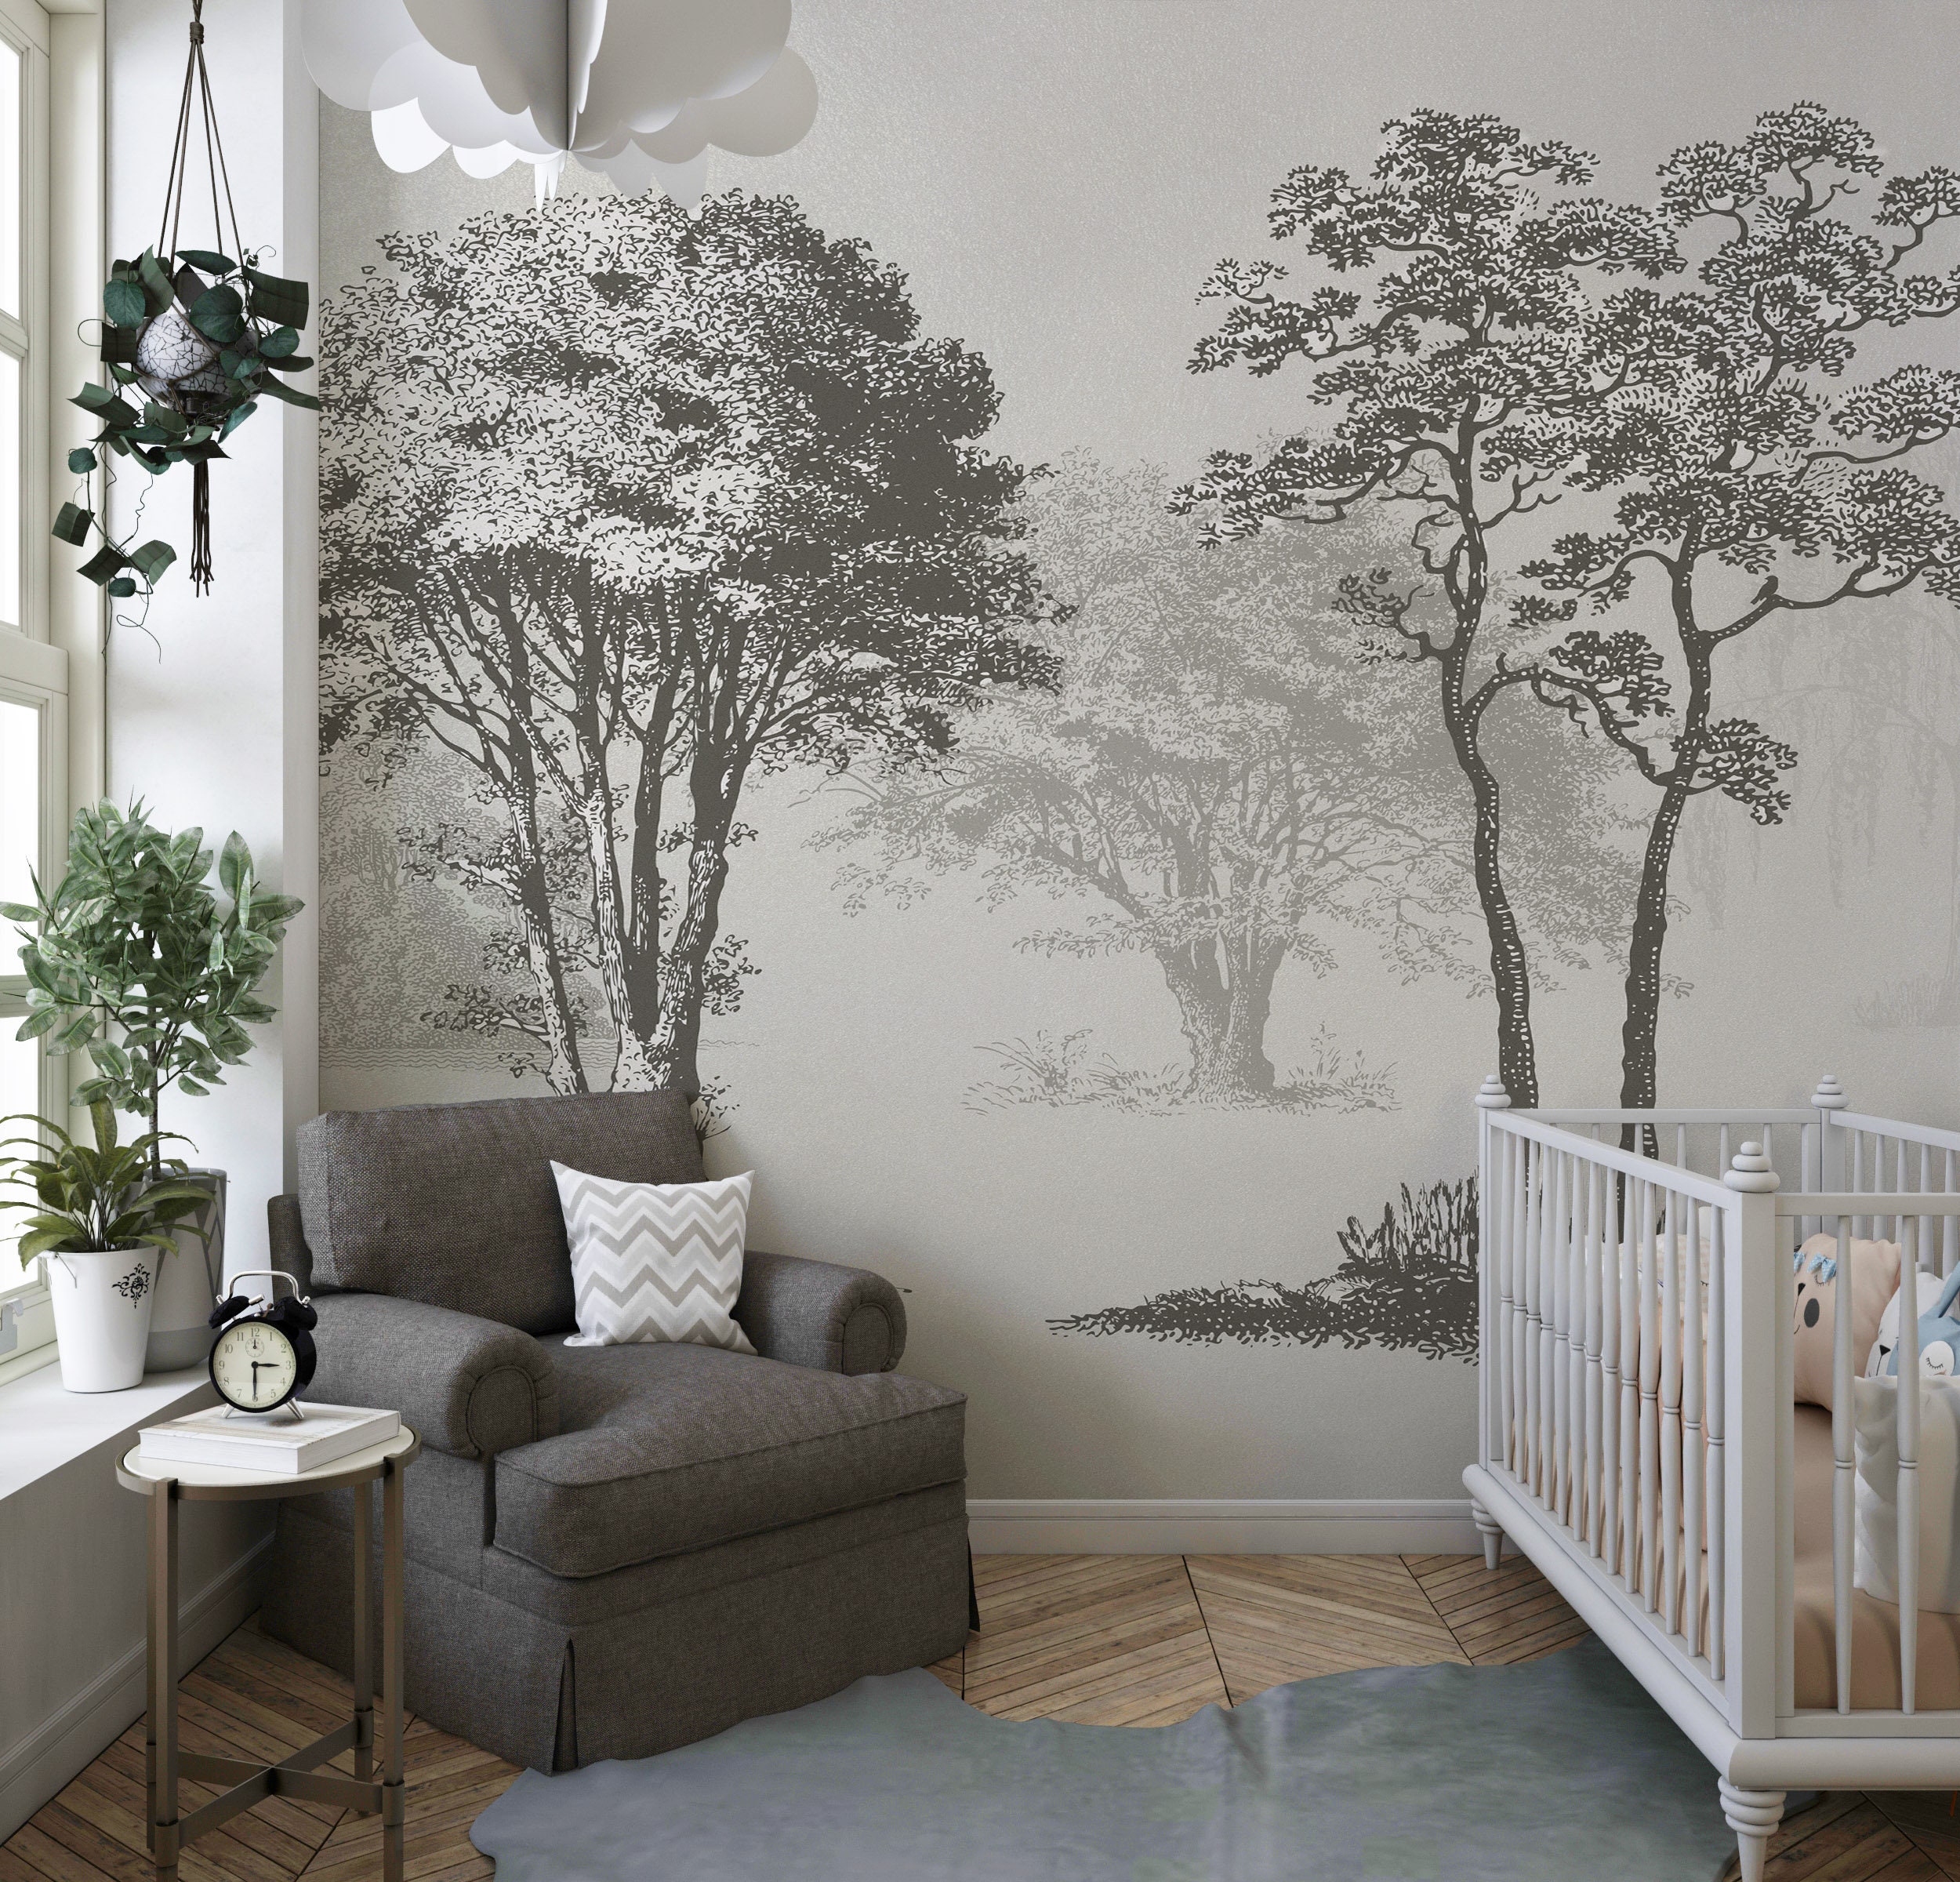 Vintage Forest Trees Wall Mural. Monochrome Abstract Sketched Art Design.  Peel & Stick Wallpaper Removable Wall Mural. Boho Wallpaper. 6329 - Etsy